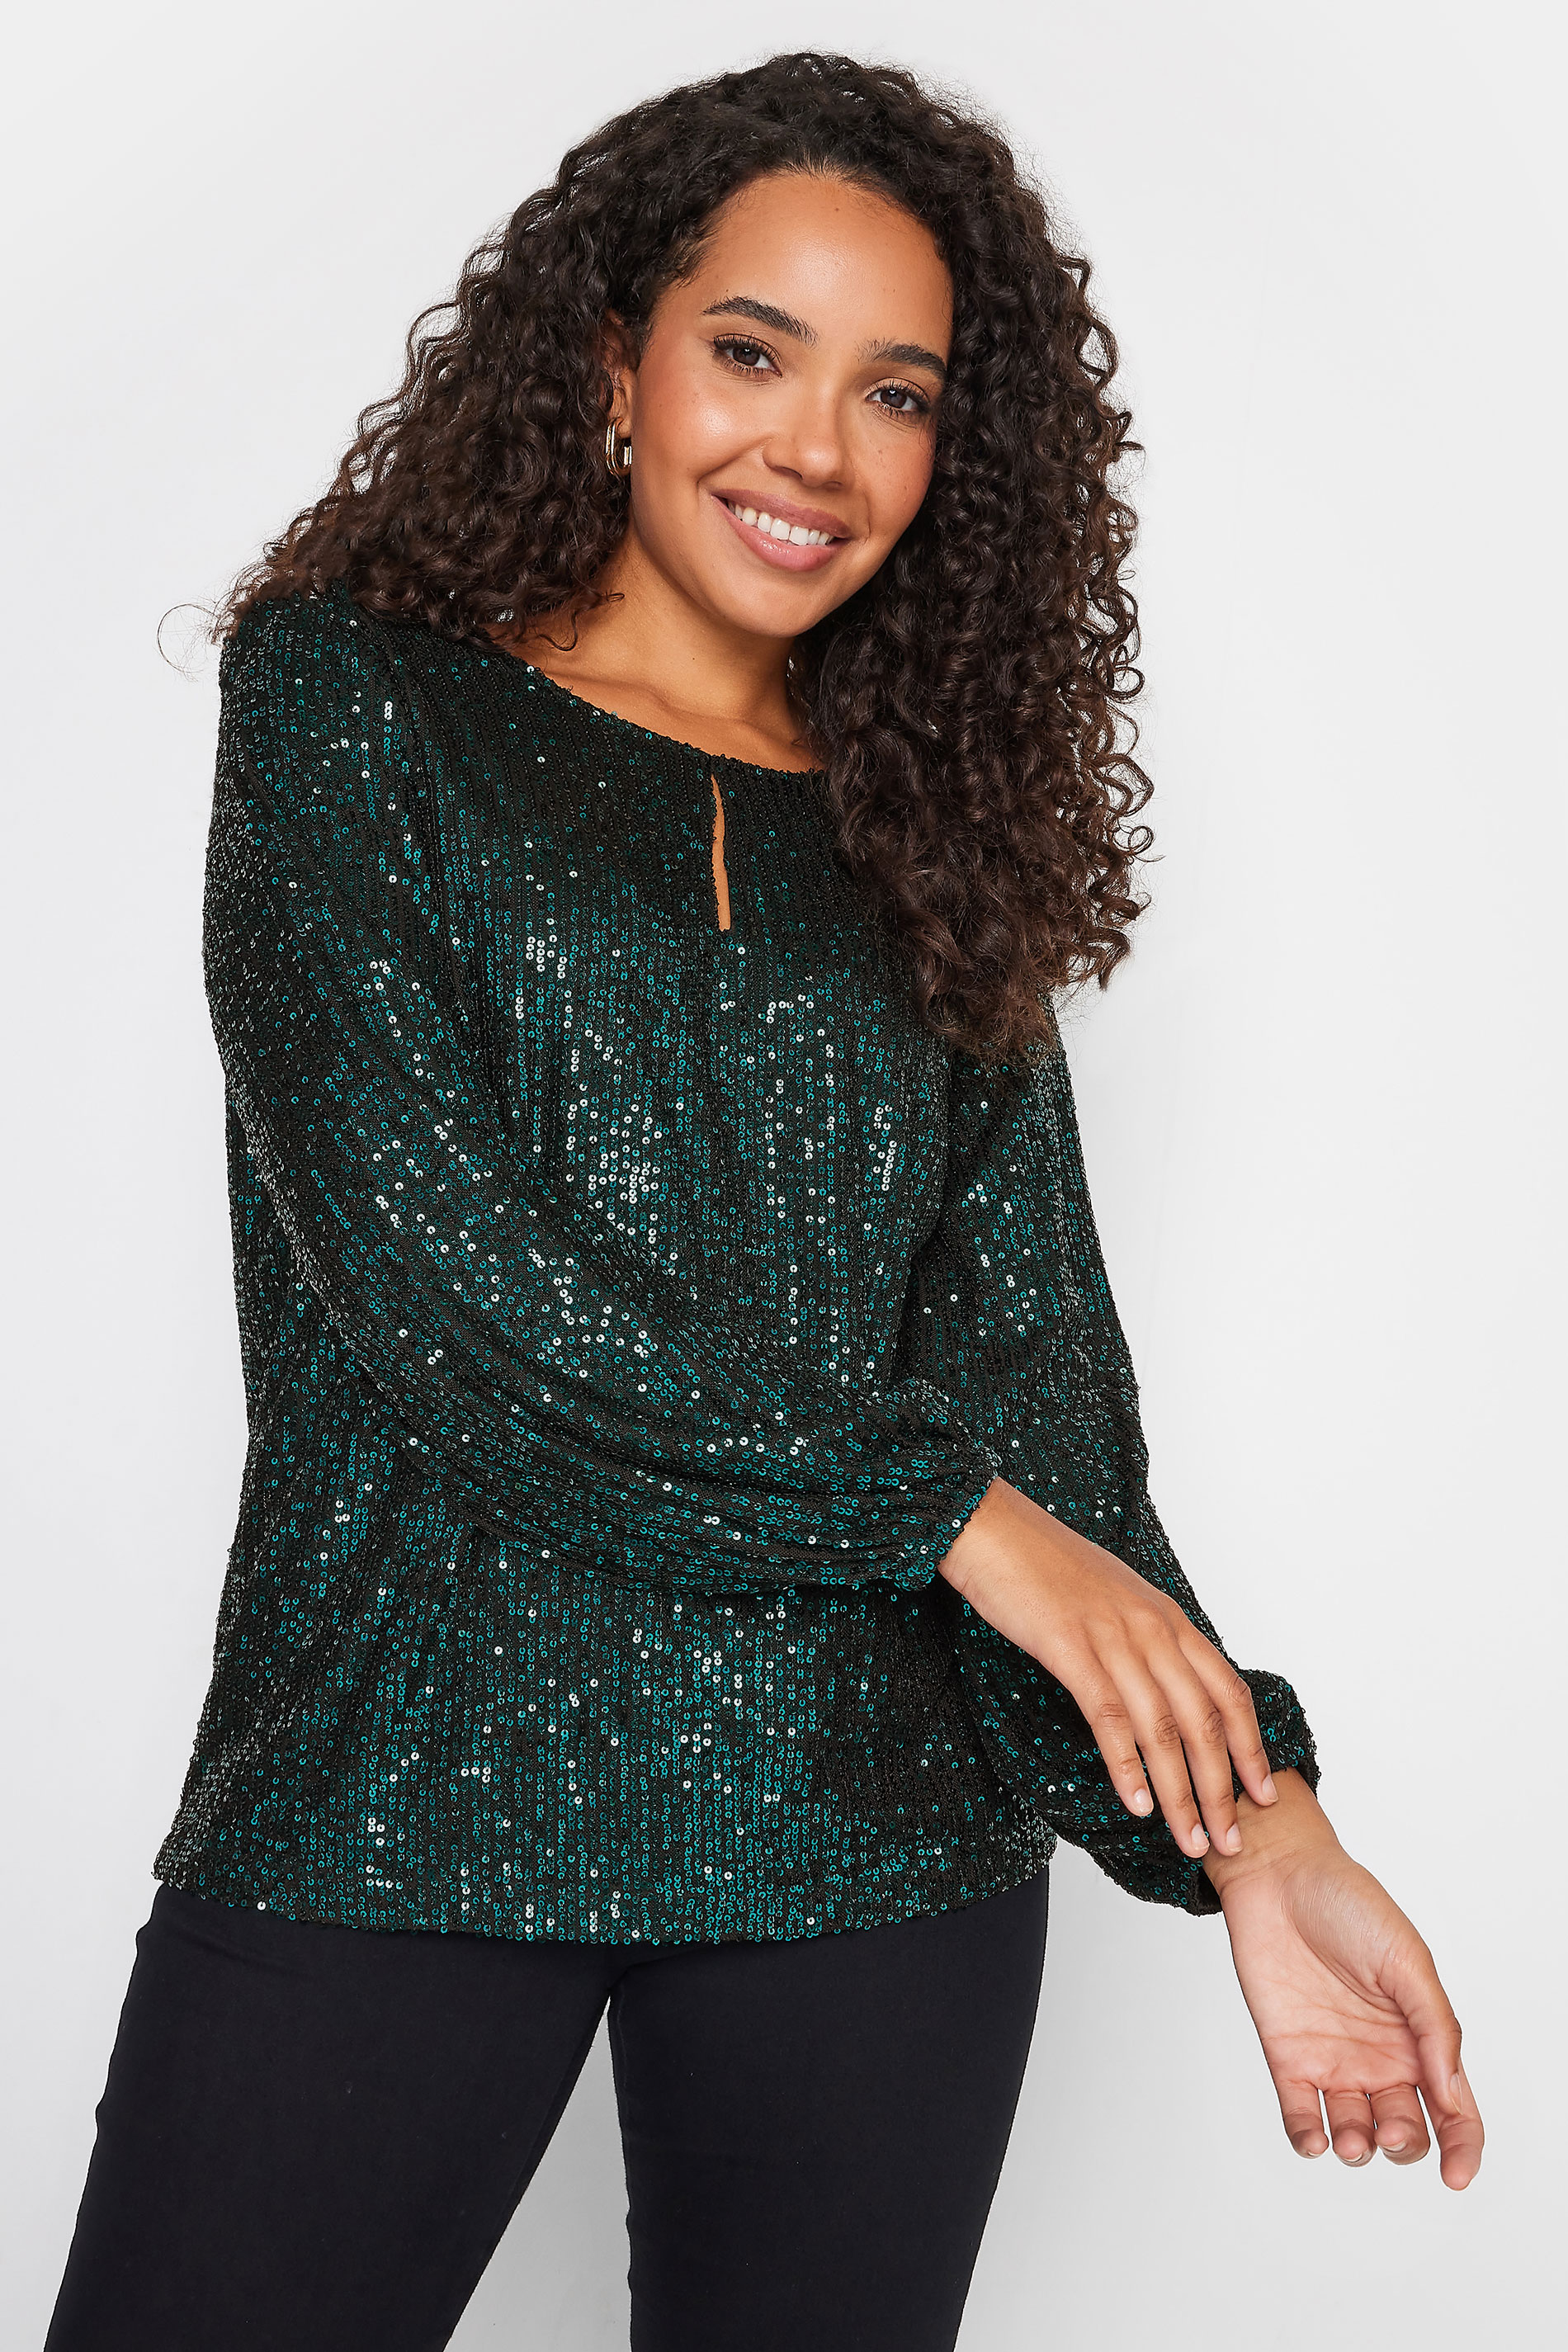 M&Co Dark Green Sequin Keyhole Long Sleeve Top | M&Co